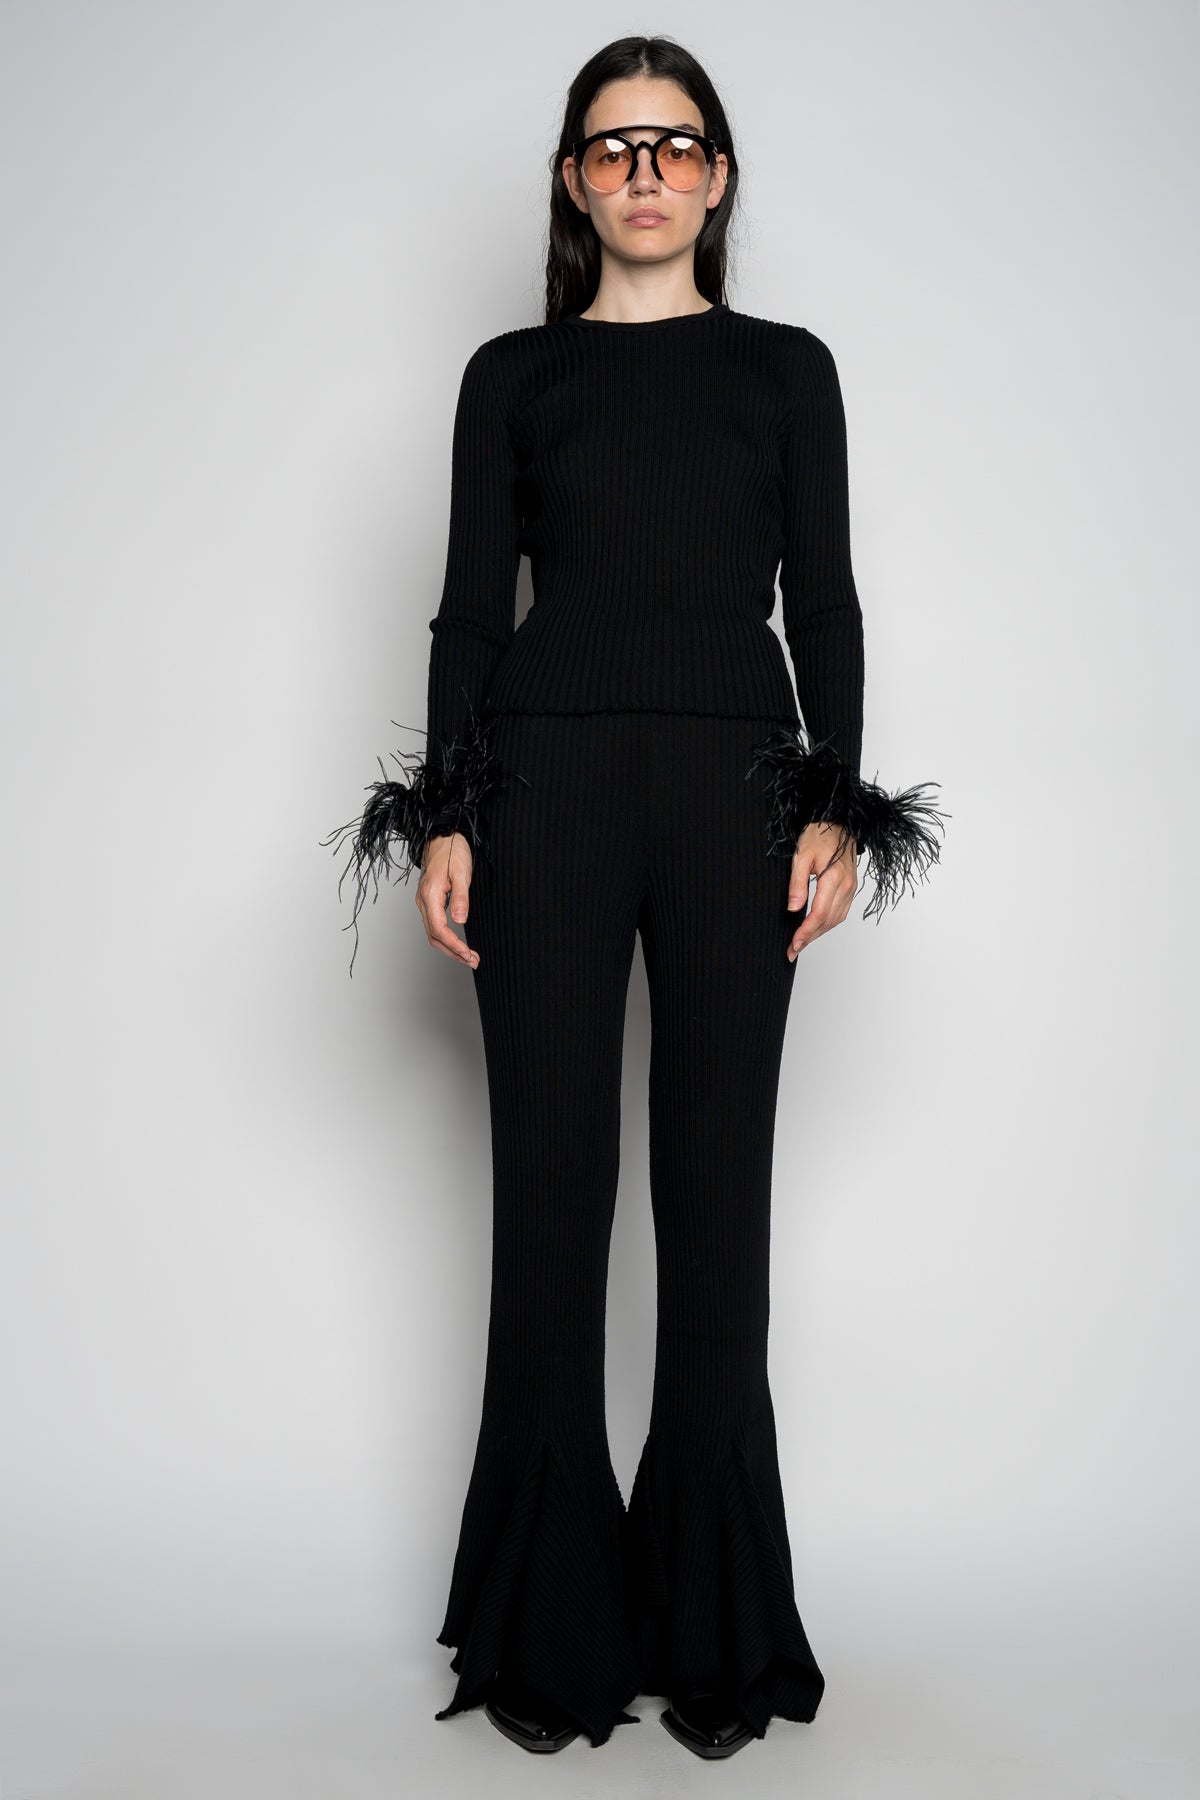 BLACK MERINO WOOL FITTED TOP WITH FEATHERS marques almeida